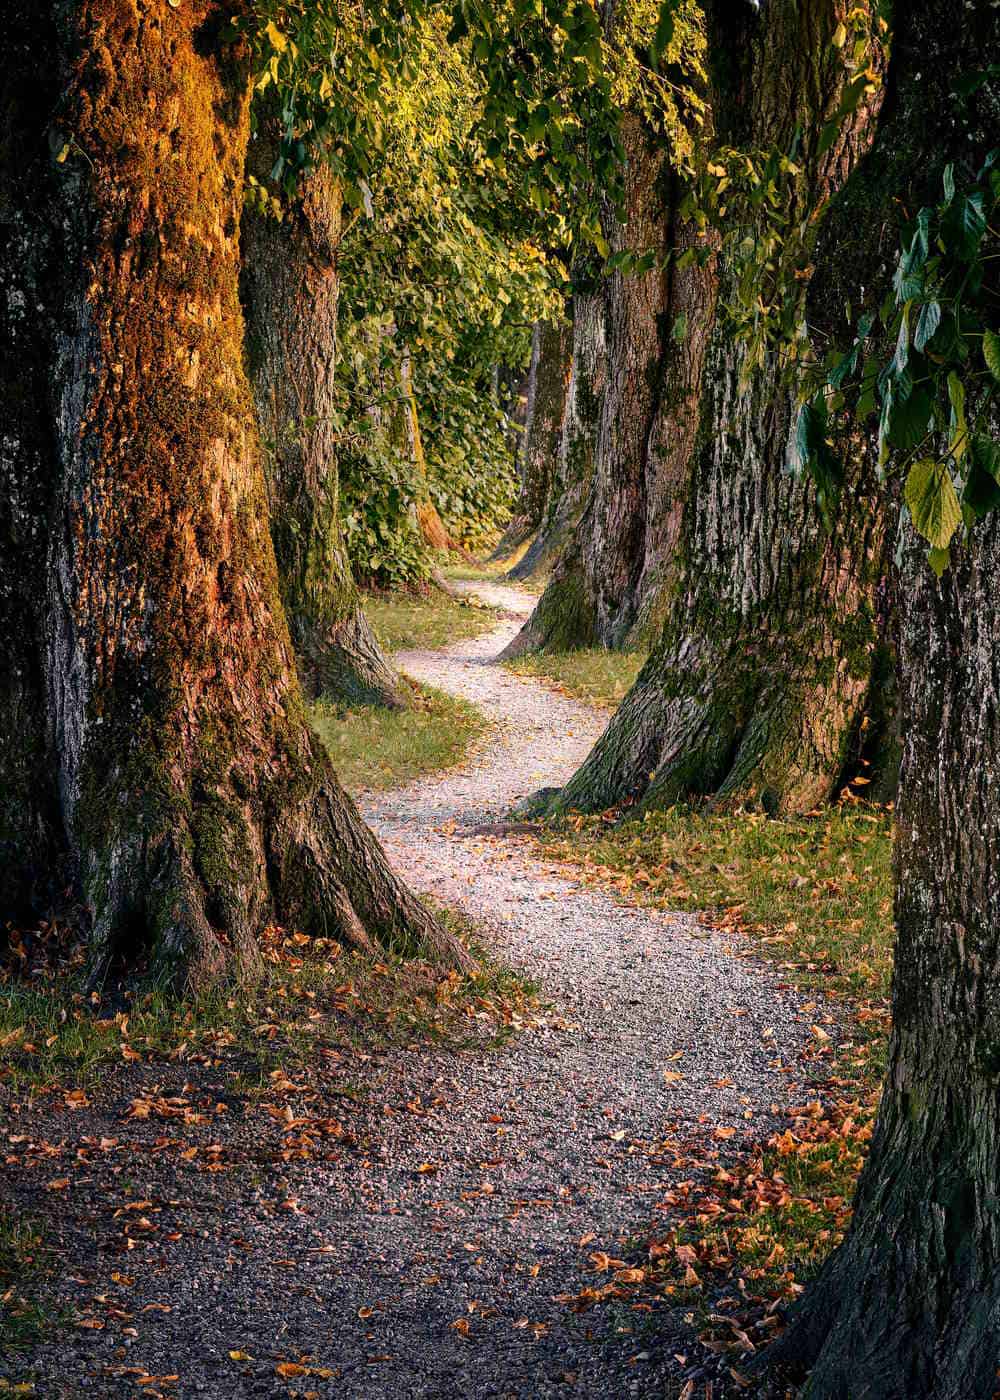 A winding, tree-lined path.